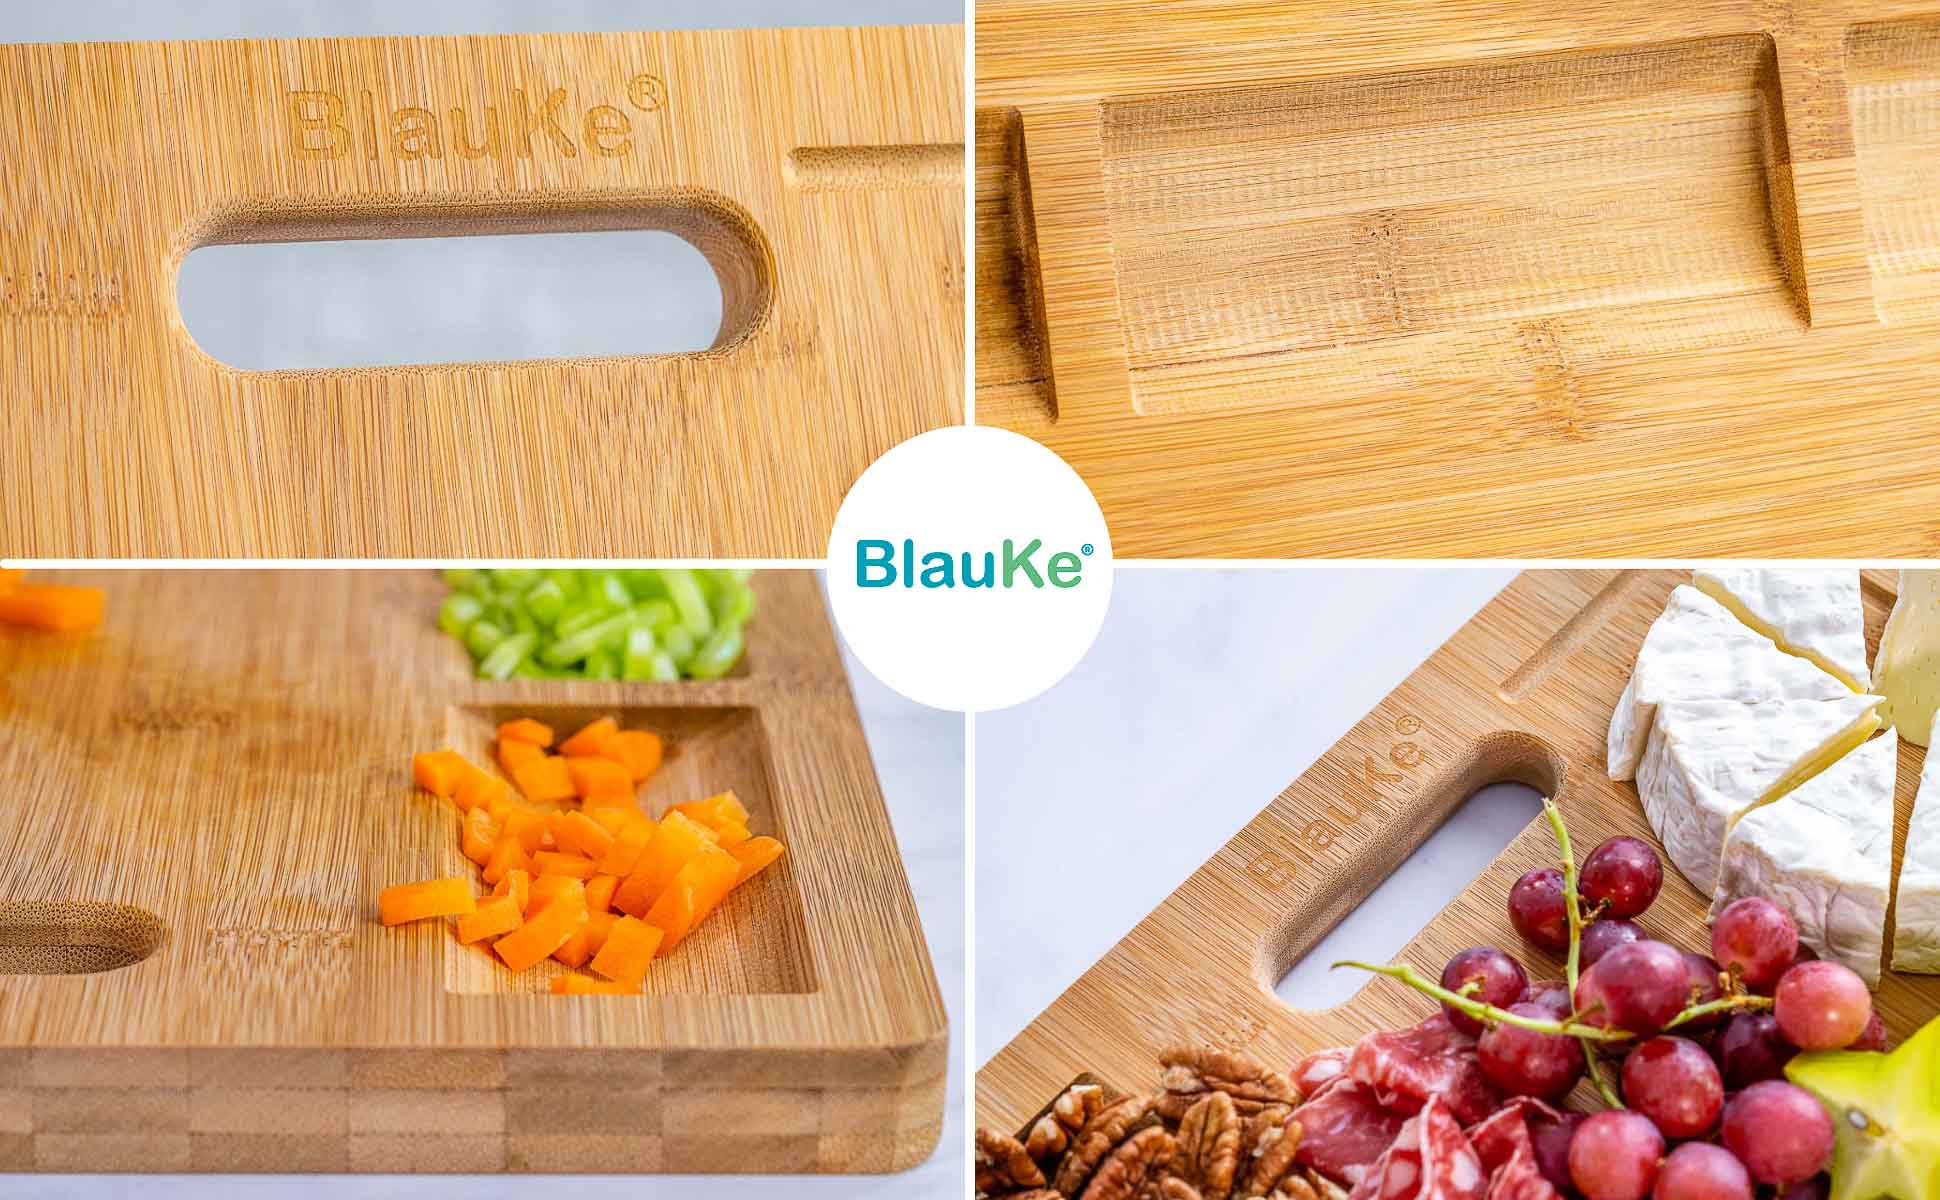 Extra Large Bamboo Cutting Board - 17x12.5 inch Wood Cutting Board for Meat, Cheese, Veggies - Wood Serving Tray with Juice Groove and 3 Compartments